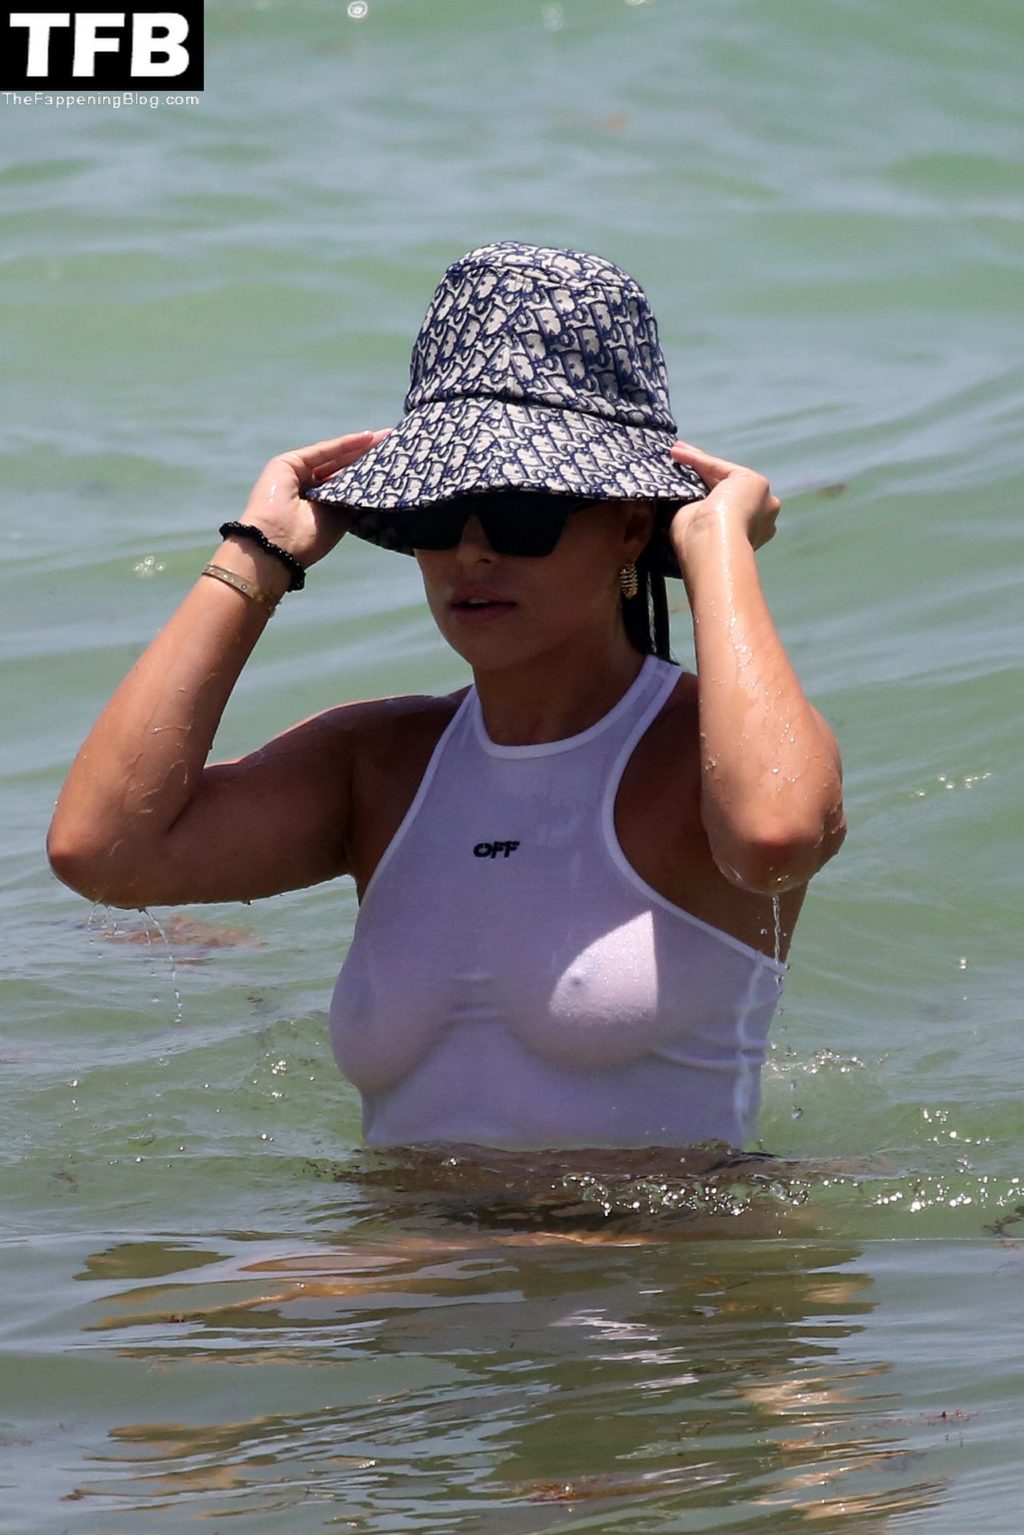 Brooks Nader Flashes Her Nude Tits on the Beach in Miami (31 Photos)